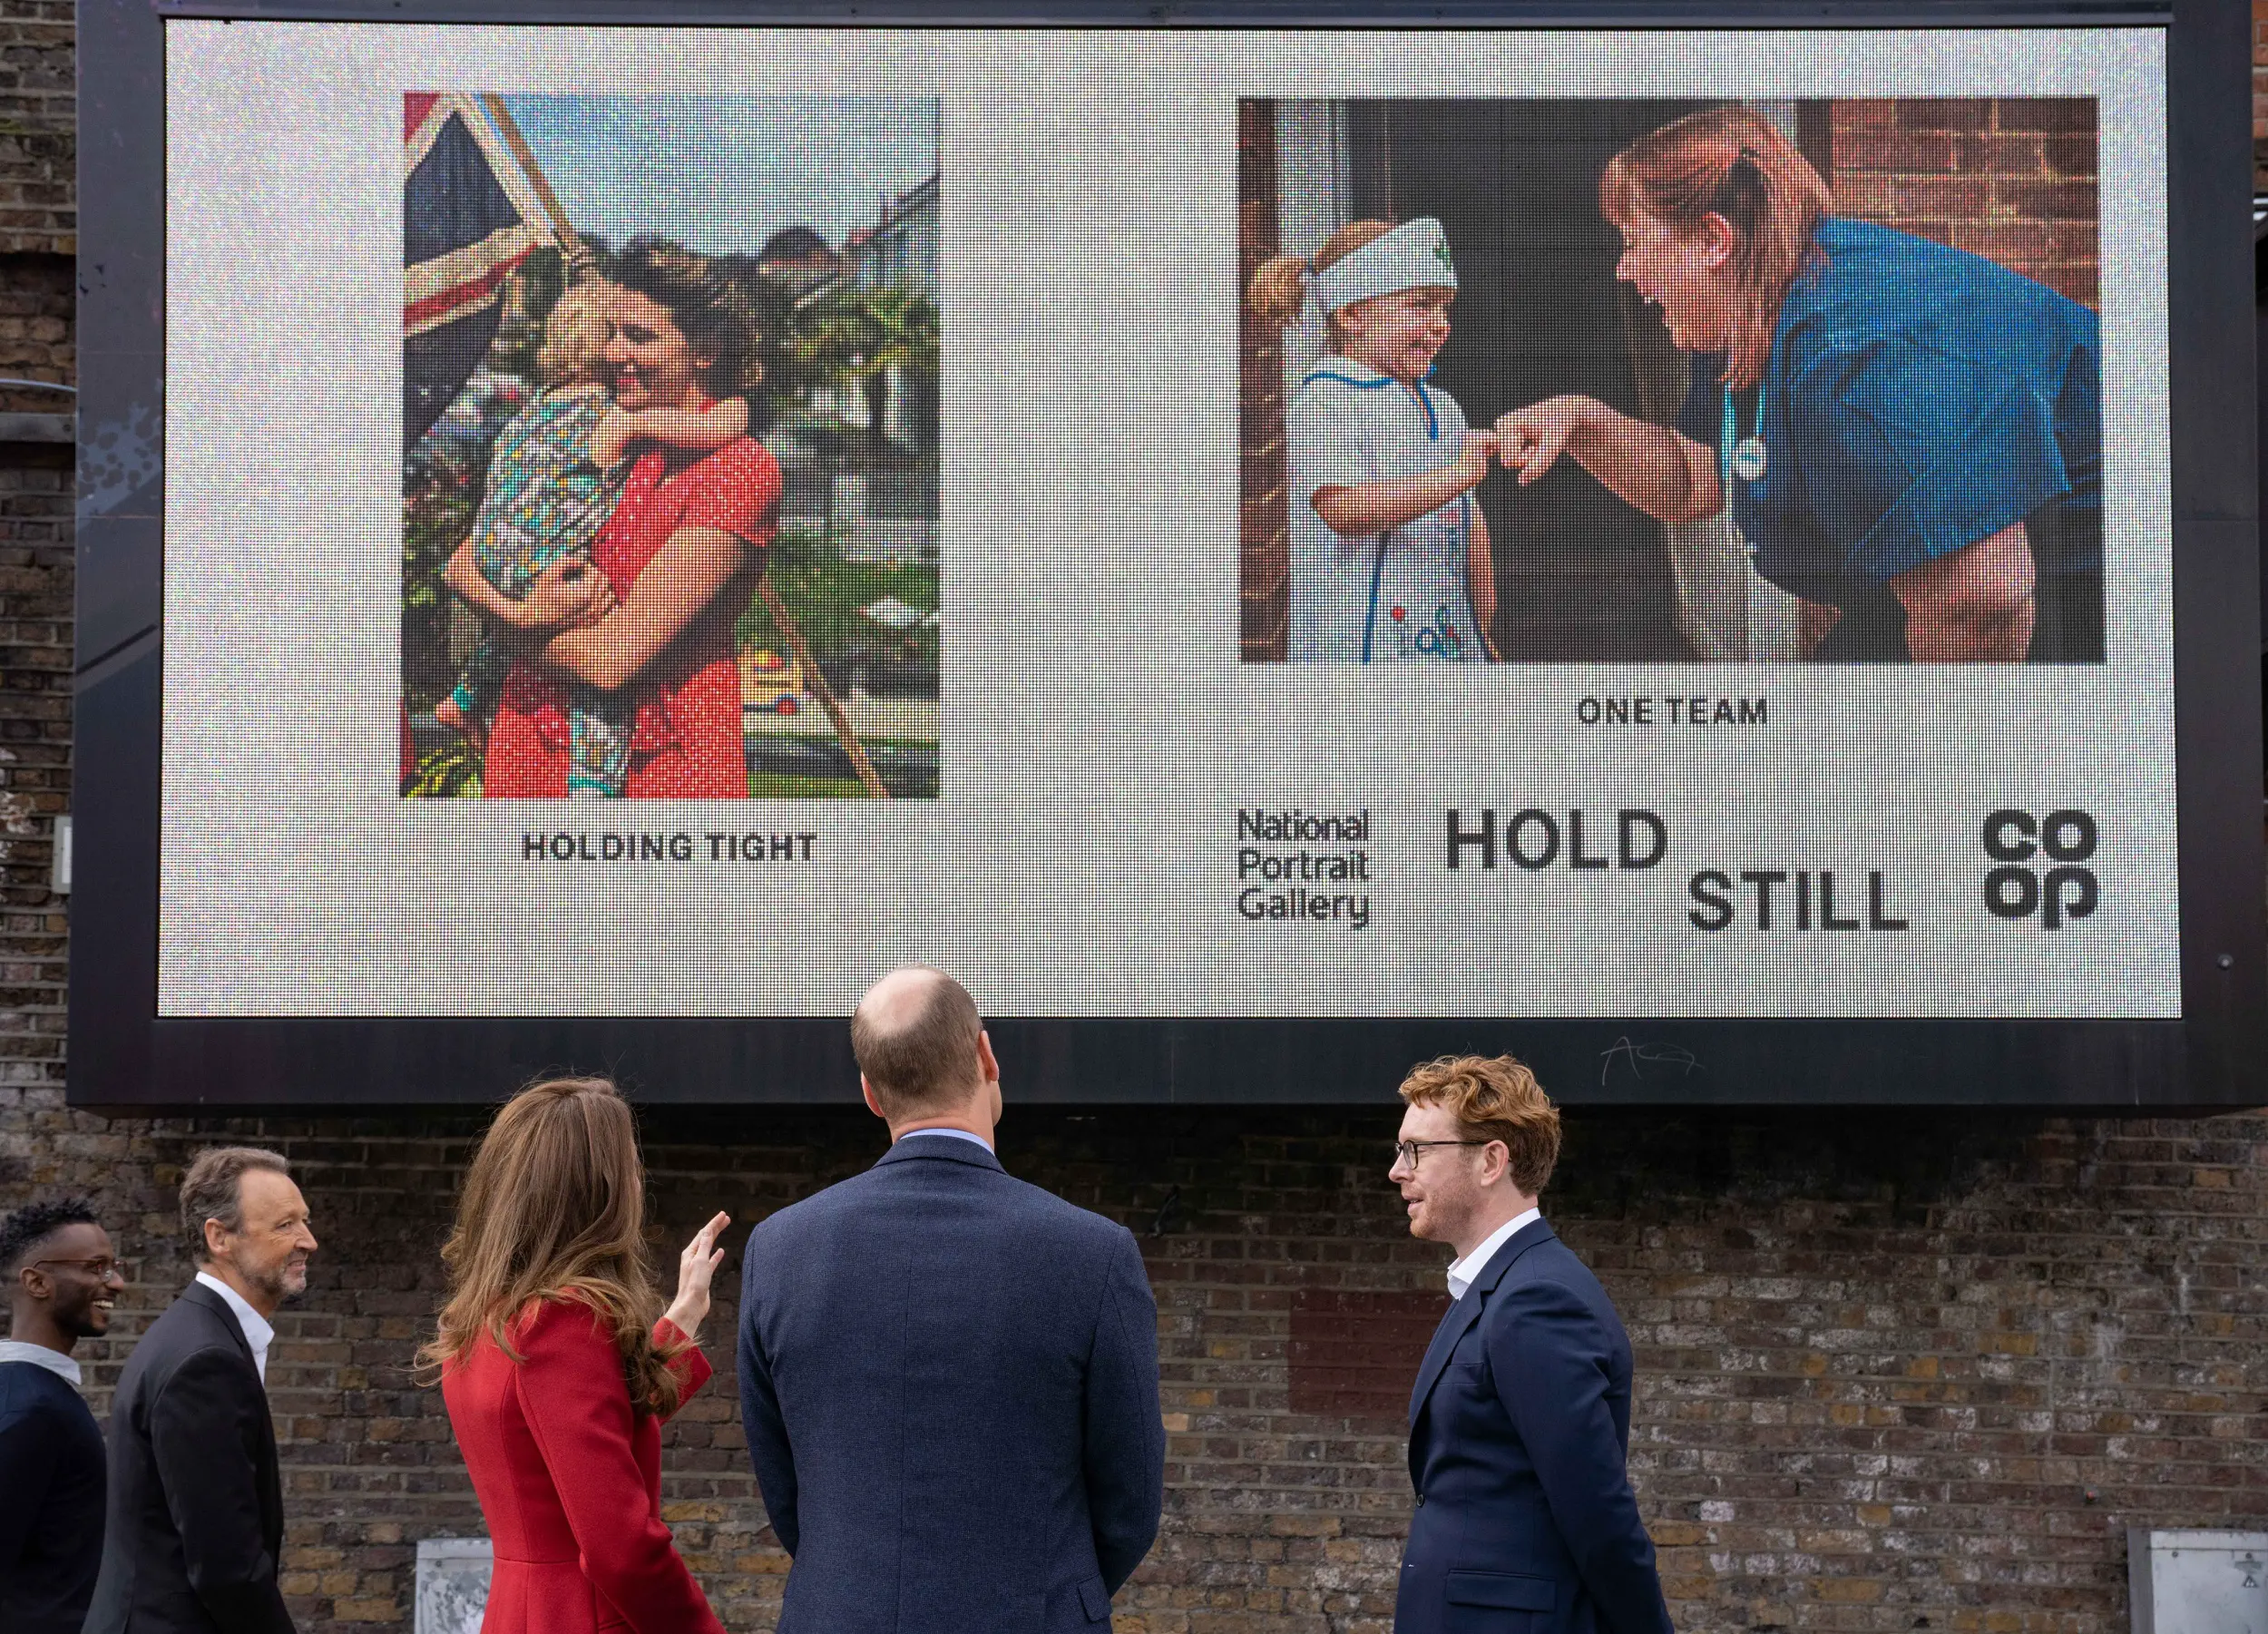 The Duke and Duchess of Cambridge mark the launch of Hold Still 2020 community exhibition